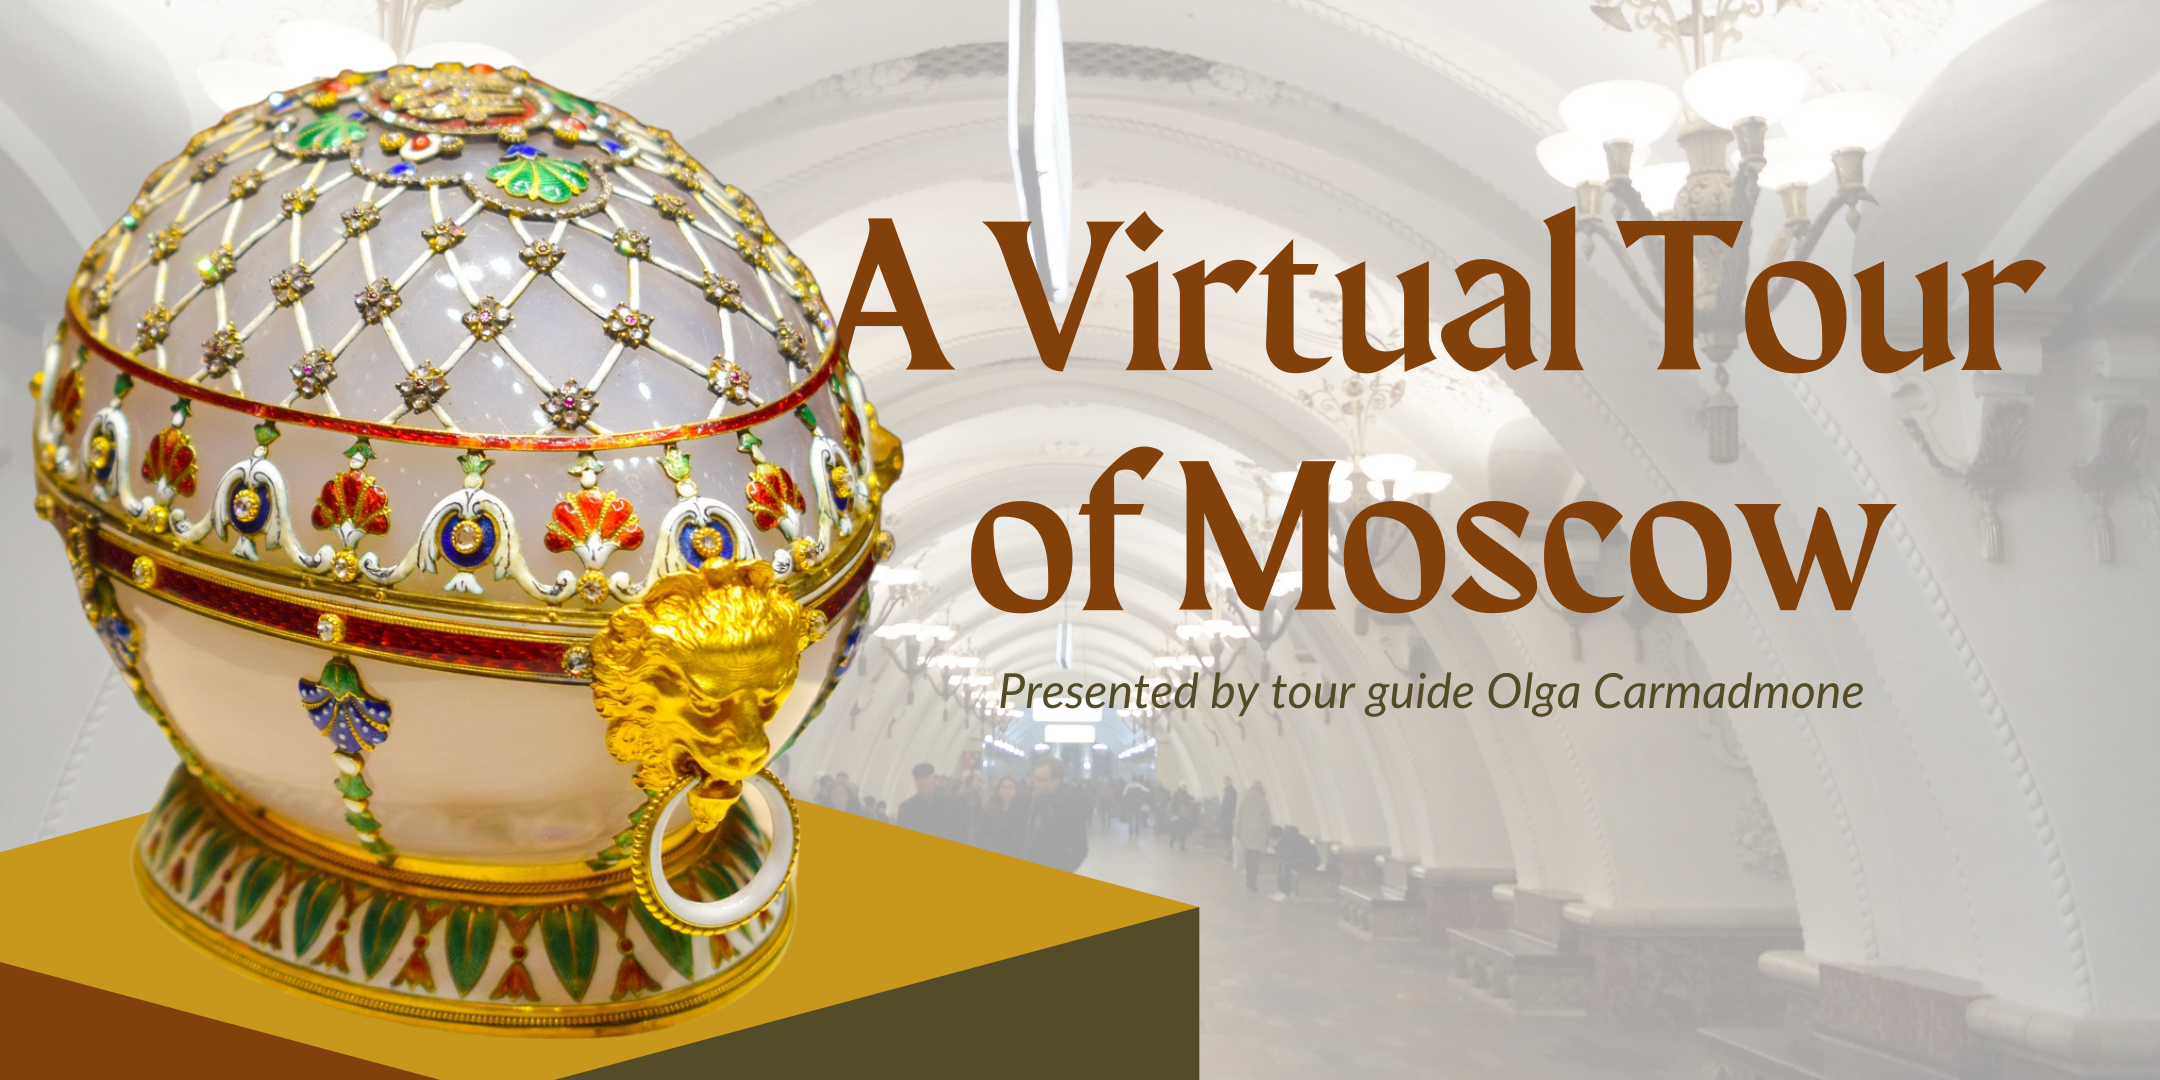 image of "A Virtual Tour of Moscow"